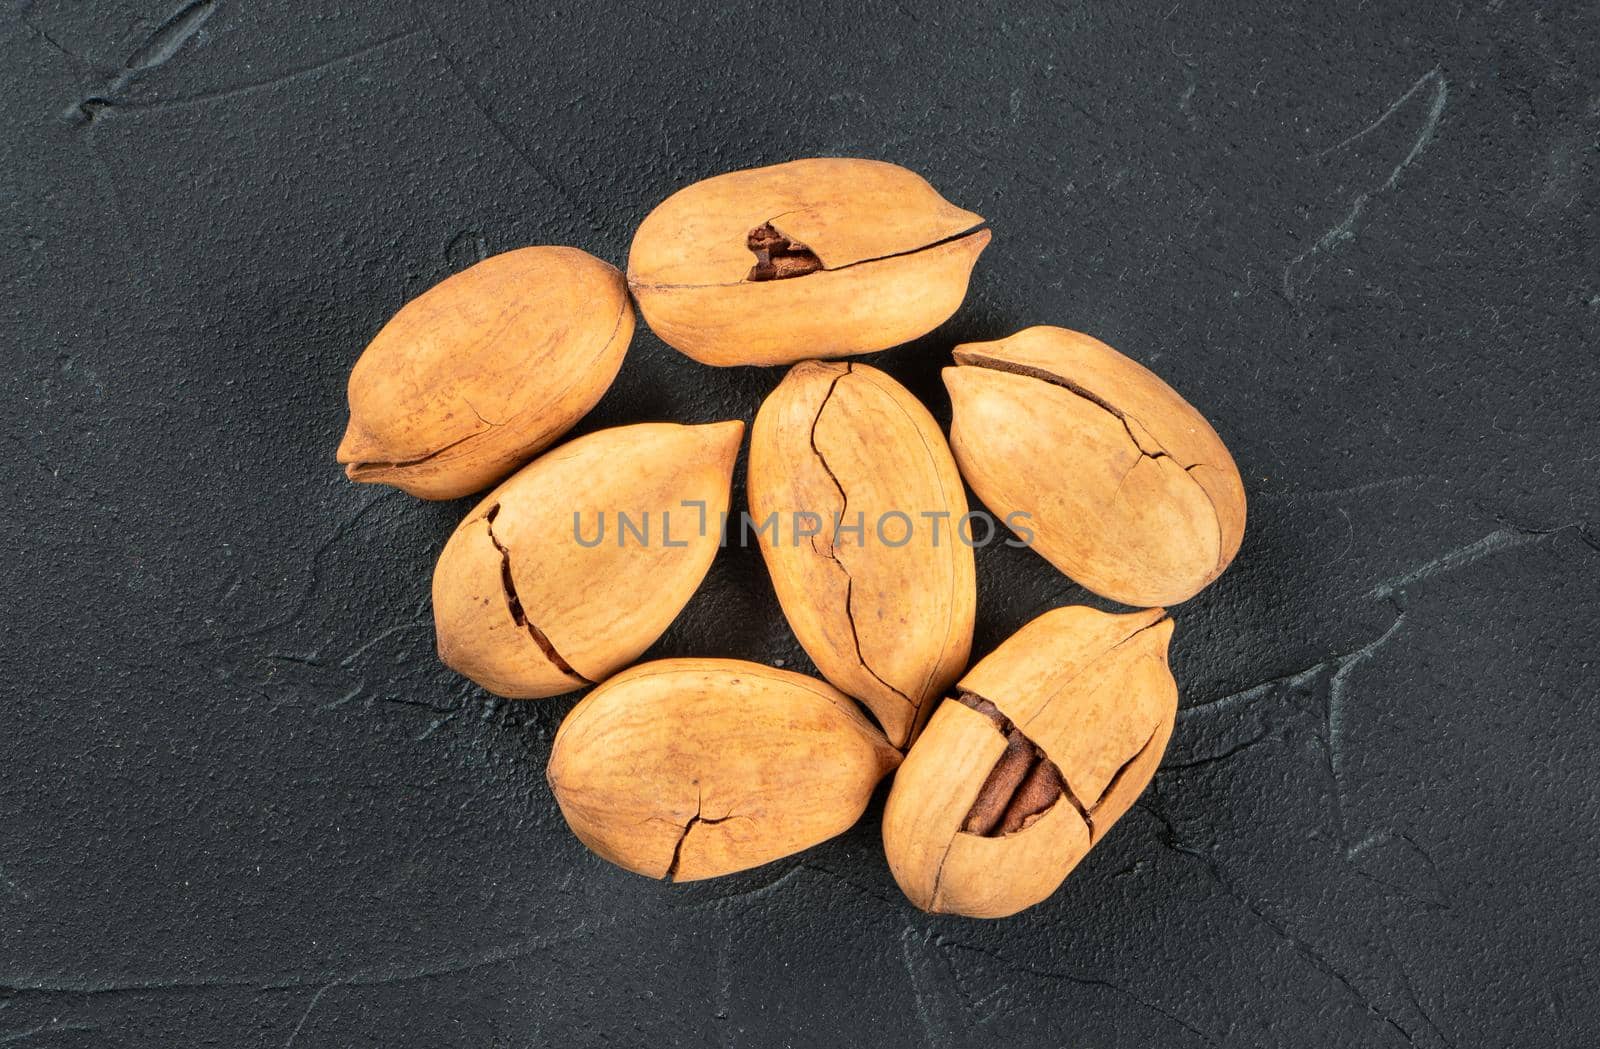 Small pile of inshell pecans on a dark background, top view